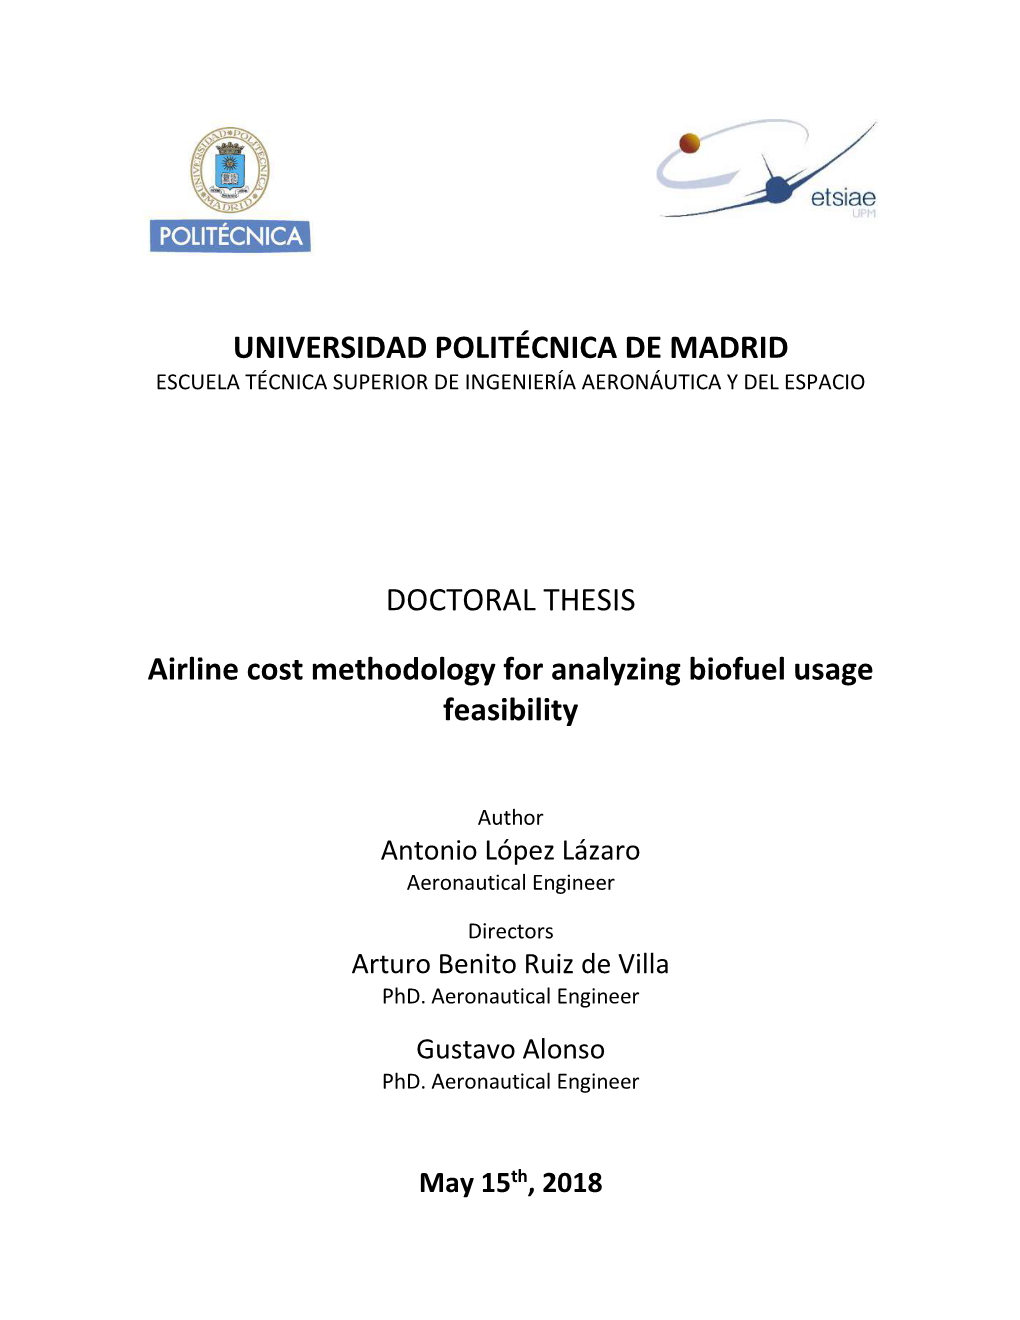 Airline Cost Methodology for Analyzing Biofuel Usage Feasibility